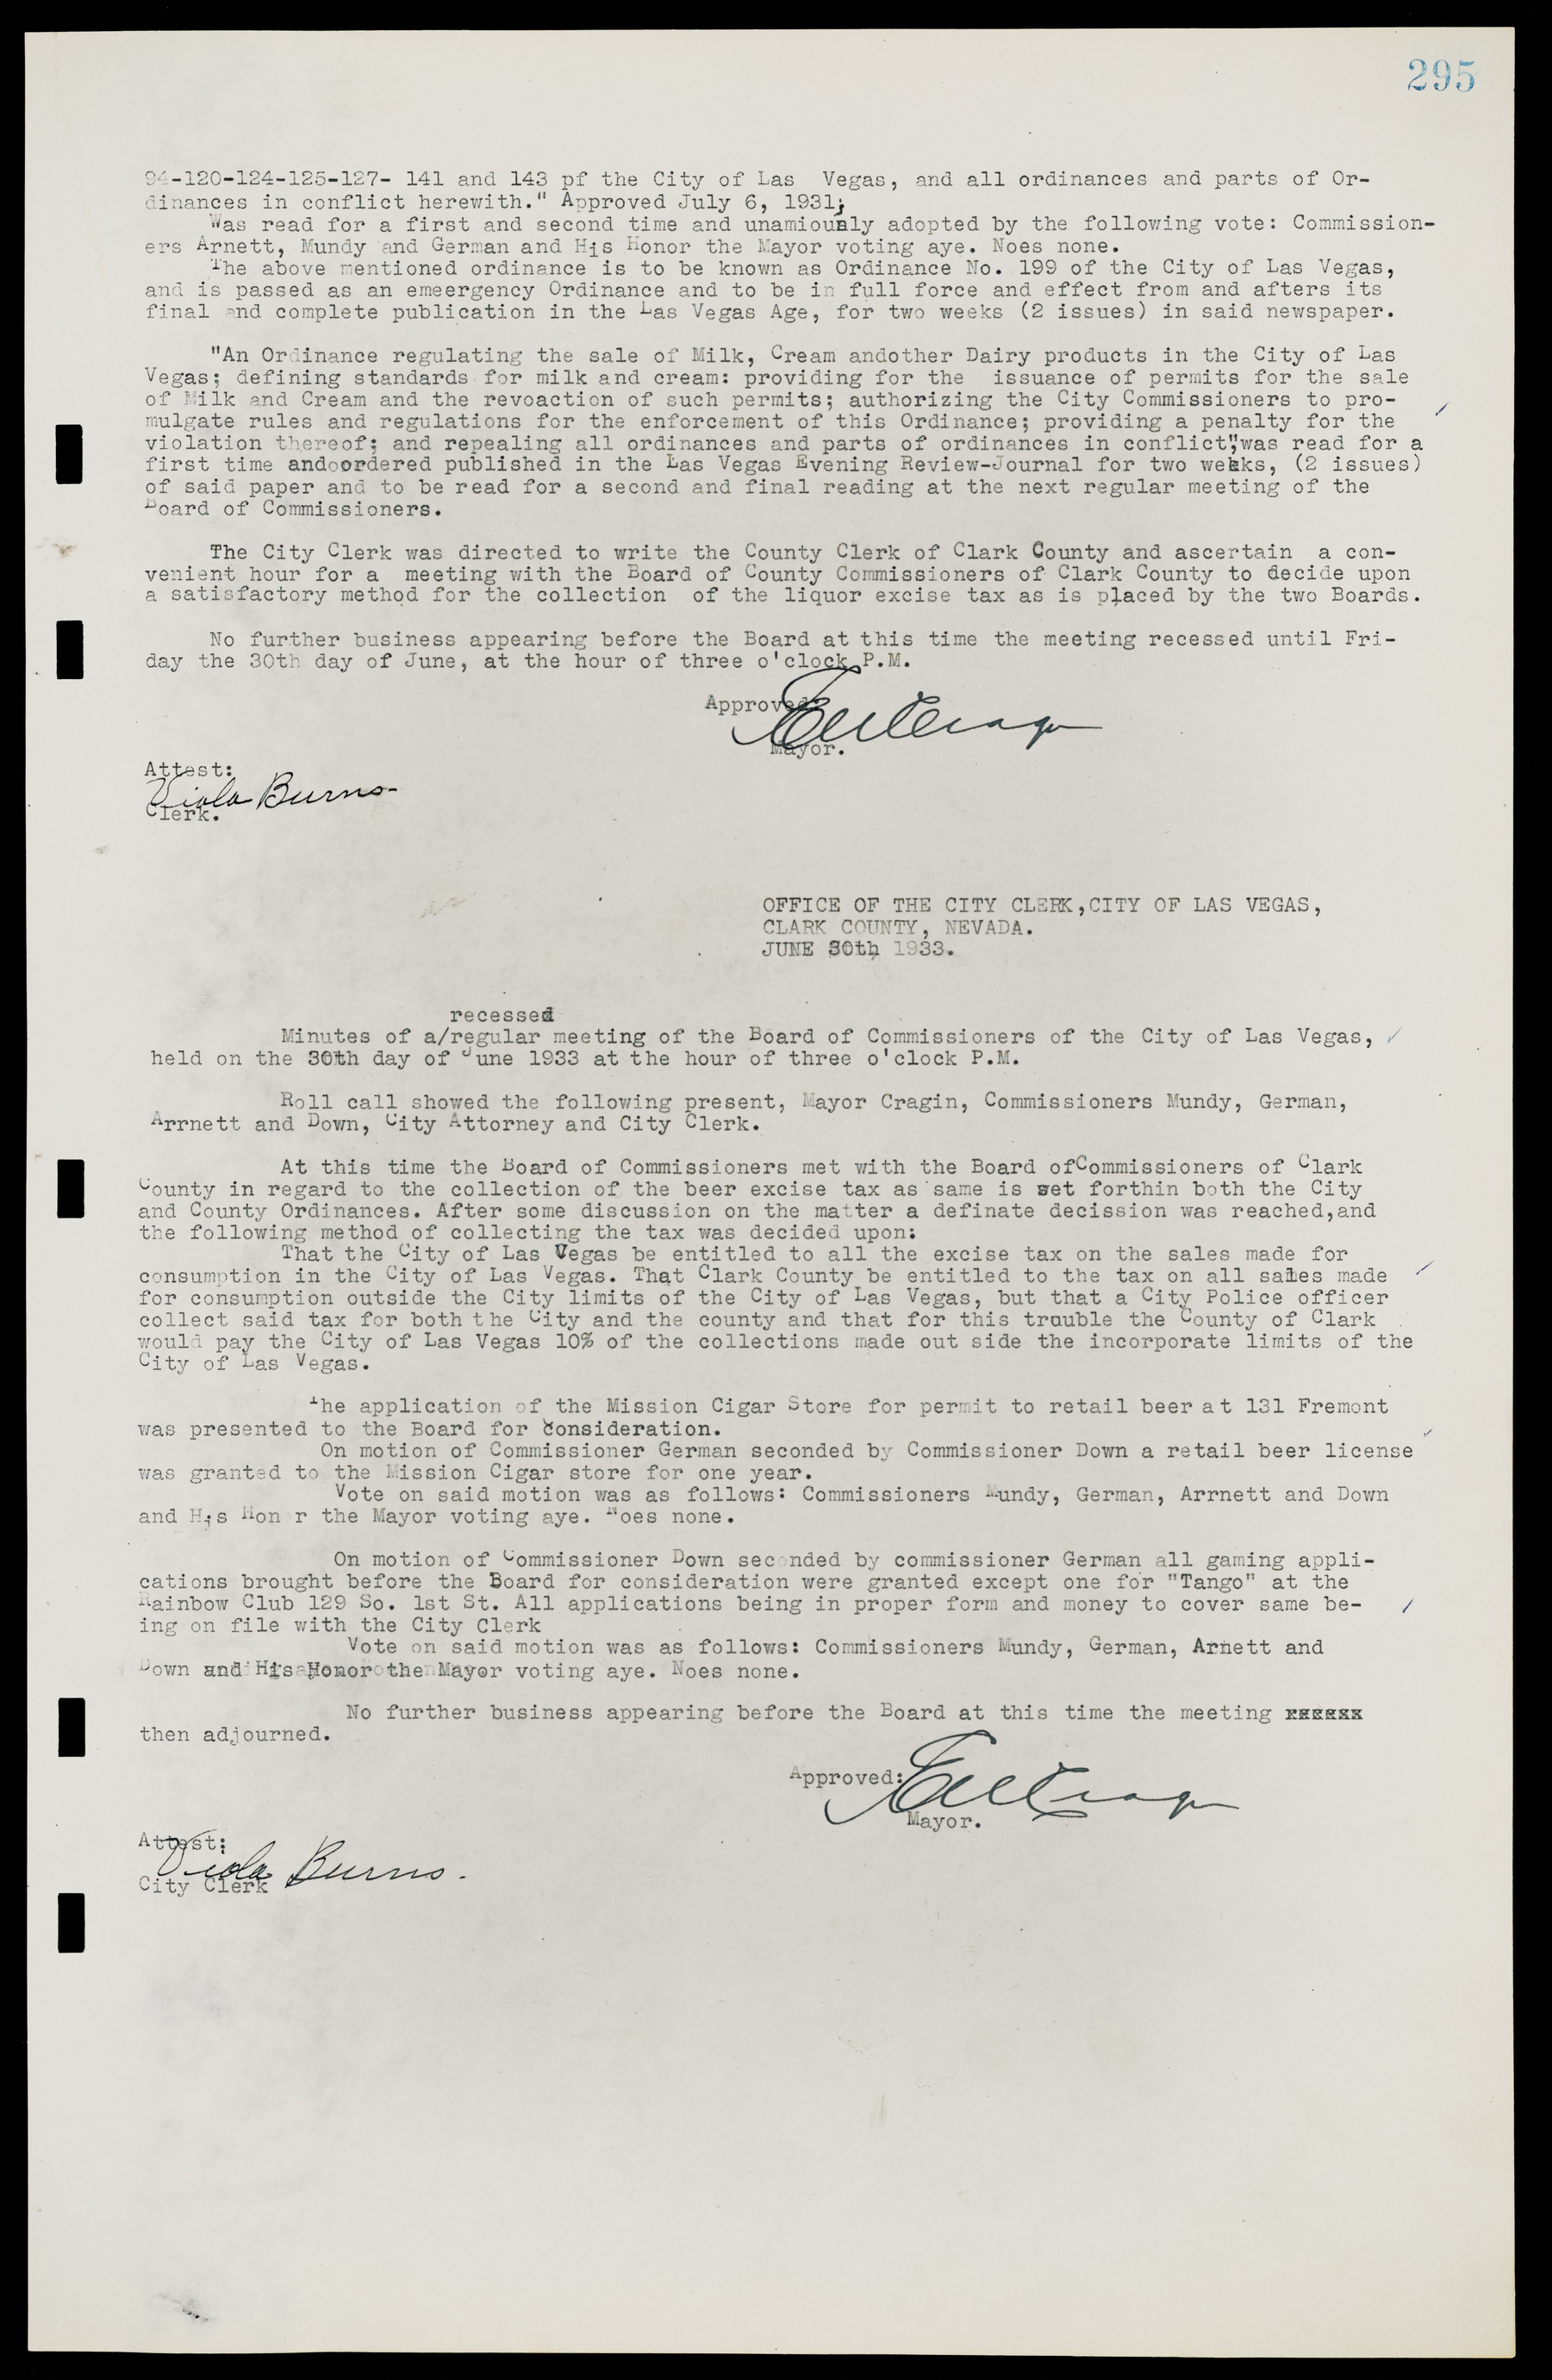 Las Vegas City Commission Minutes, May 14, 1929 to February 11, 1937, lvc000003-302